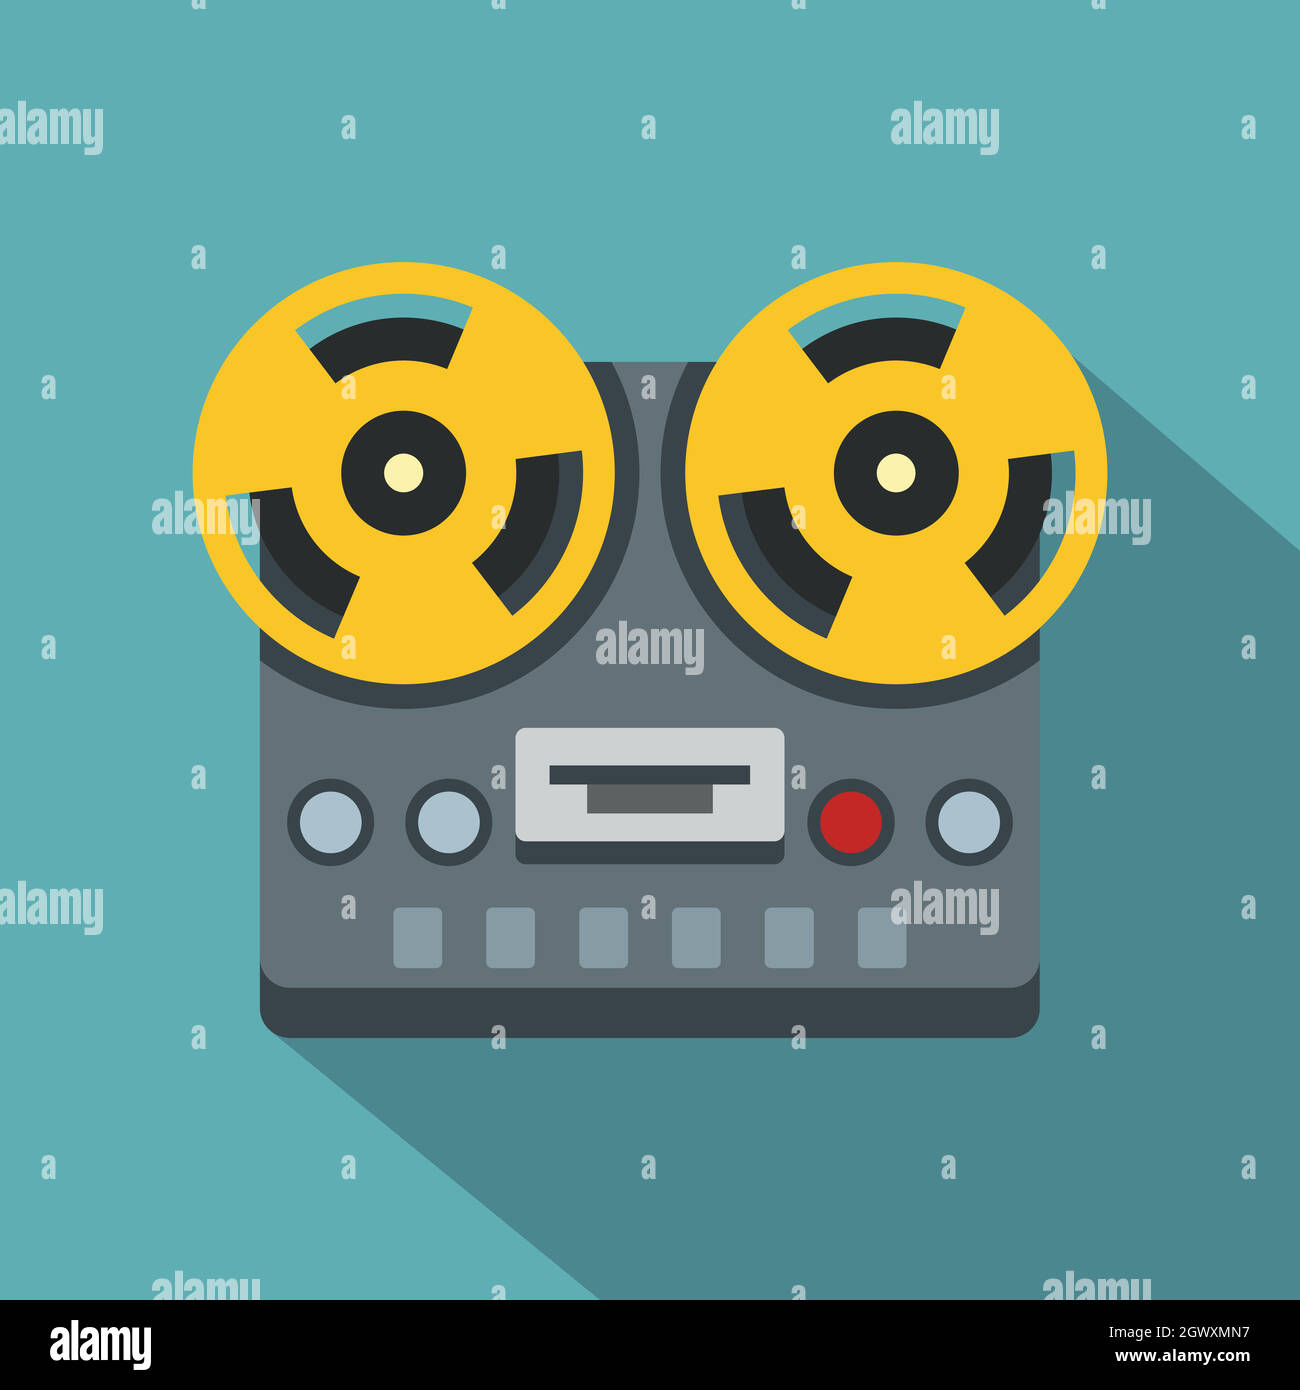 Vintage reel to reel tape recorder deck icon Stock Vector